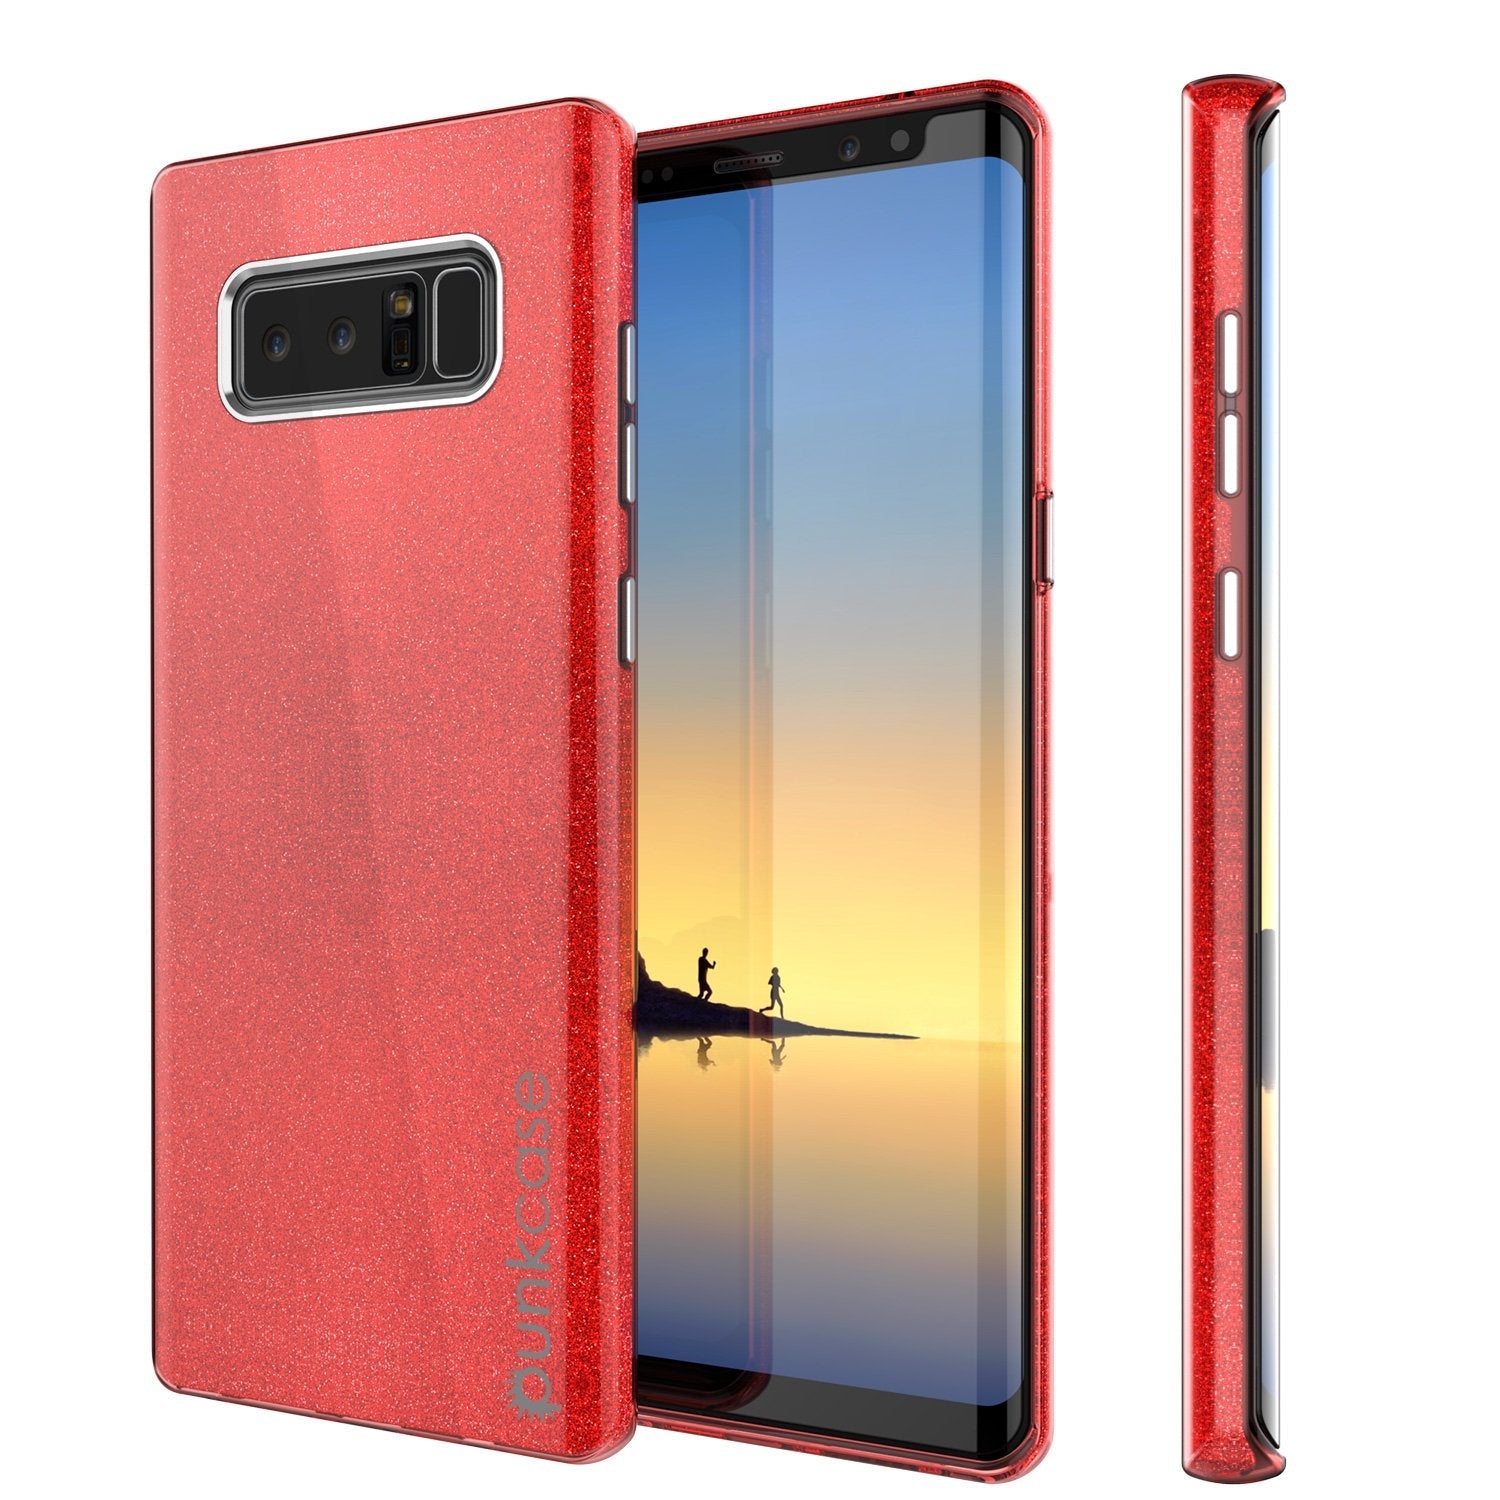 Galaxy Note 8 Case, Punkcase Galactic 2.0 Series Ultra Slim Protective Armor [Red] (Color in image: red)